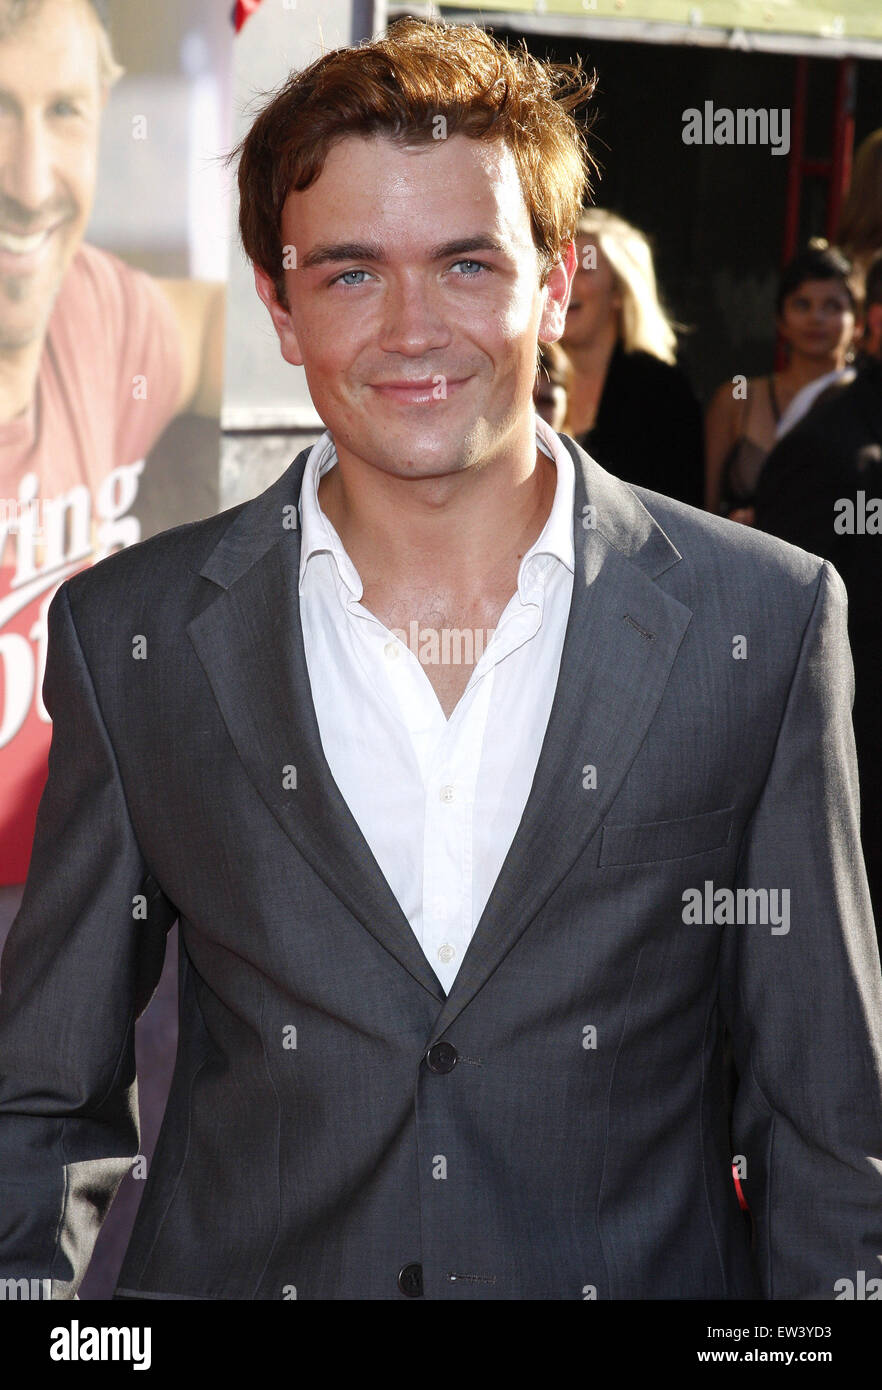 Emrhys Cooper at the Los Angeles premiere of 'Swing Vote' held at the El Capitan Theater in Hollywood on July 24, 2008. Stock Photo